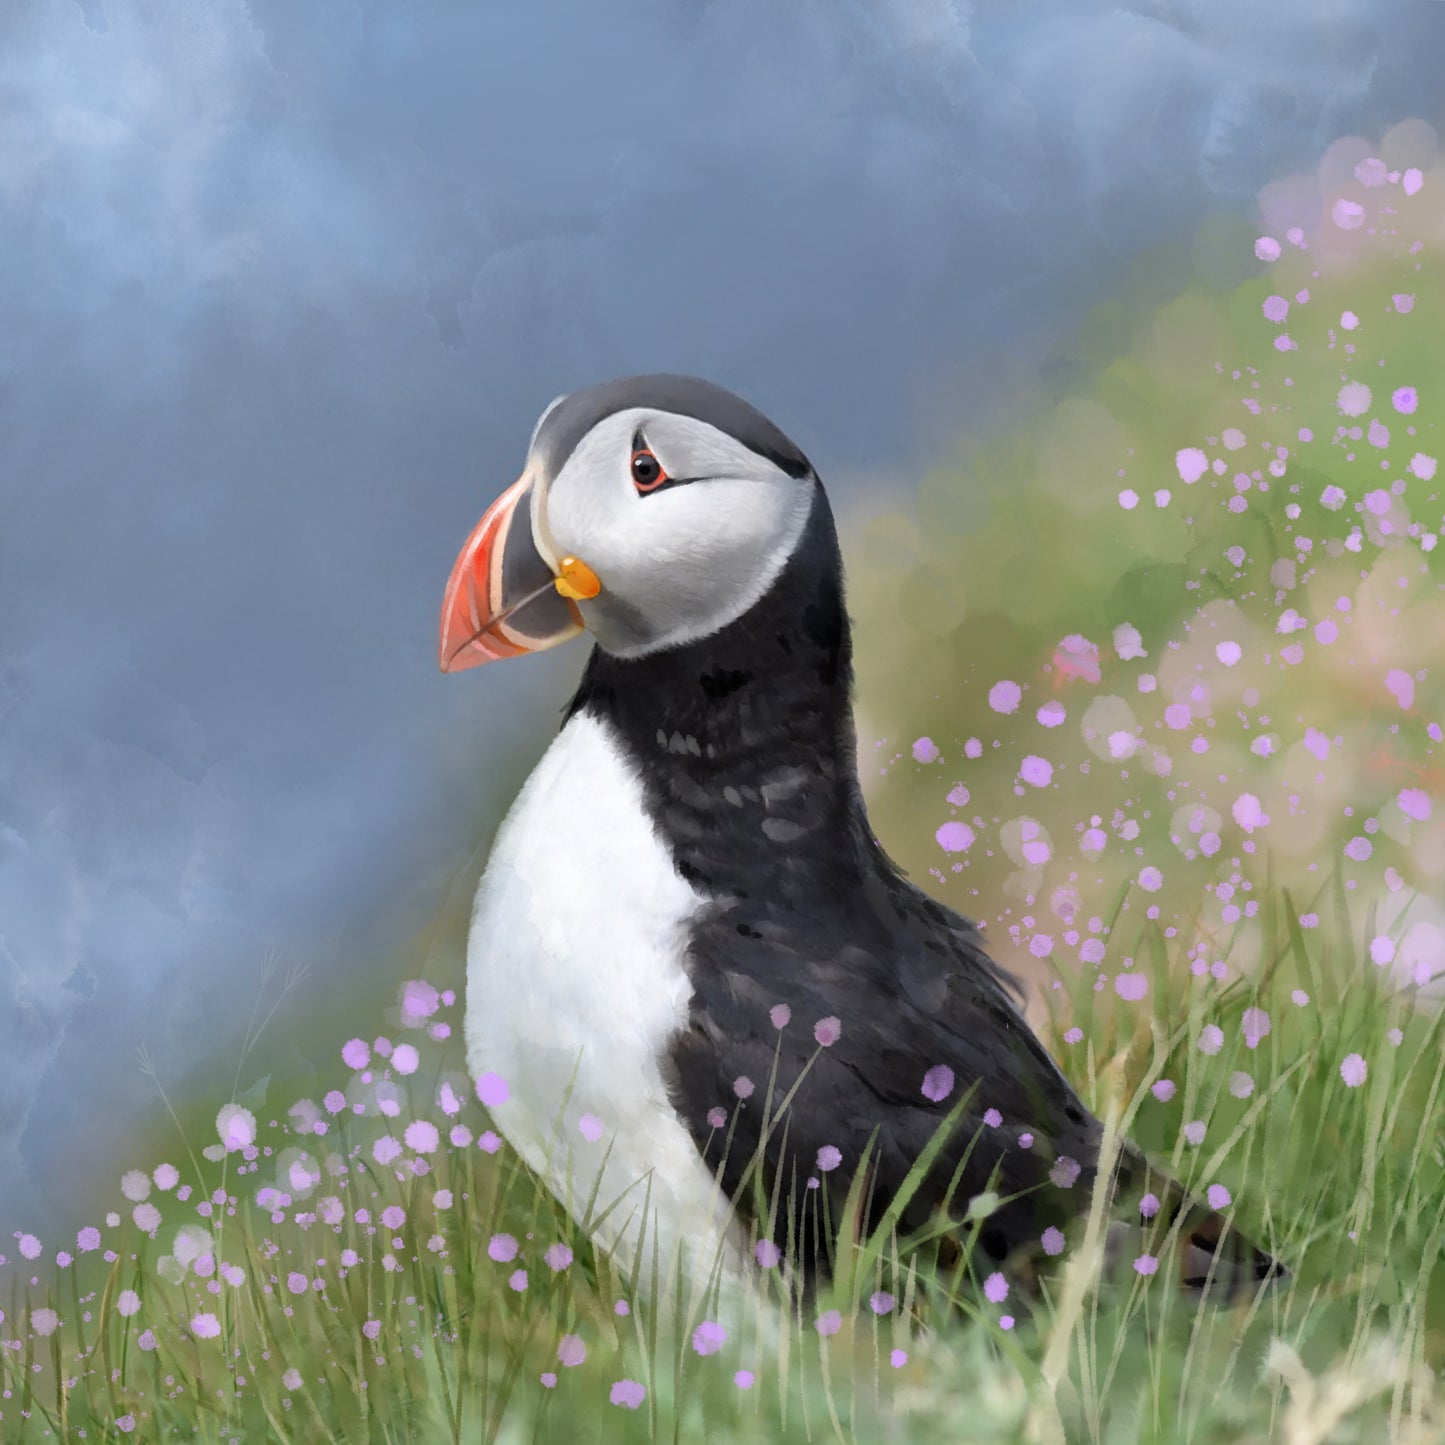 Puffin Misty Sea and Wildflowers - Illustrated Print by Thomas Little